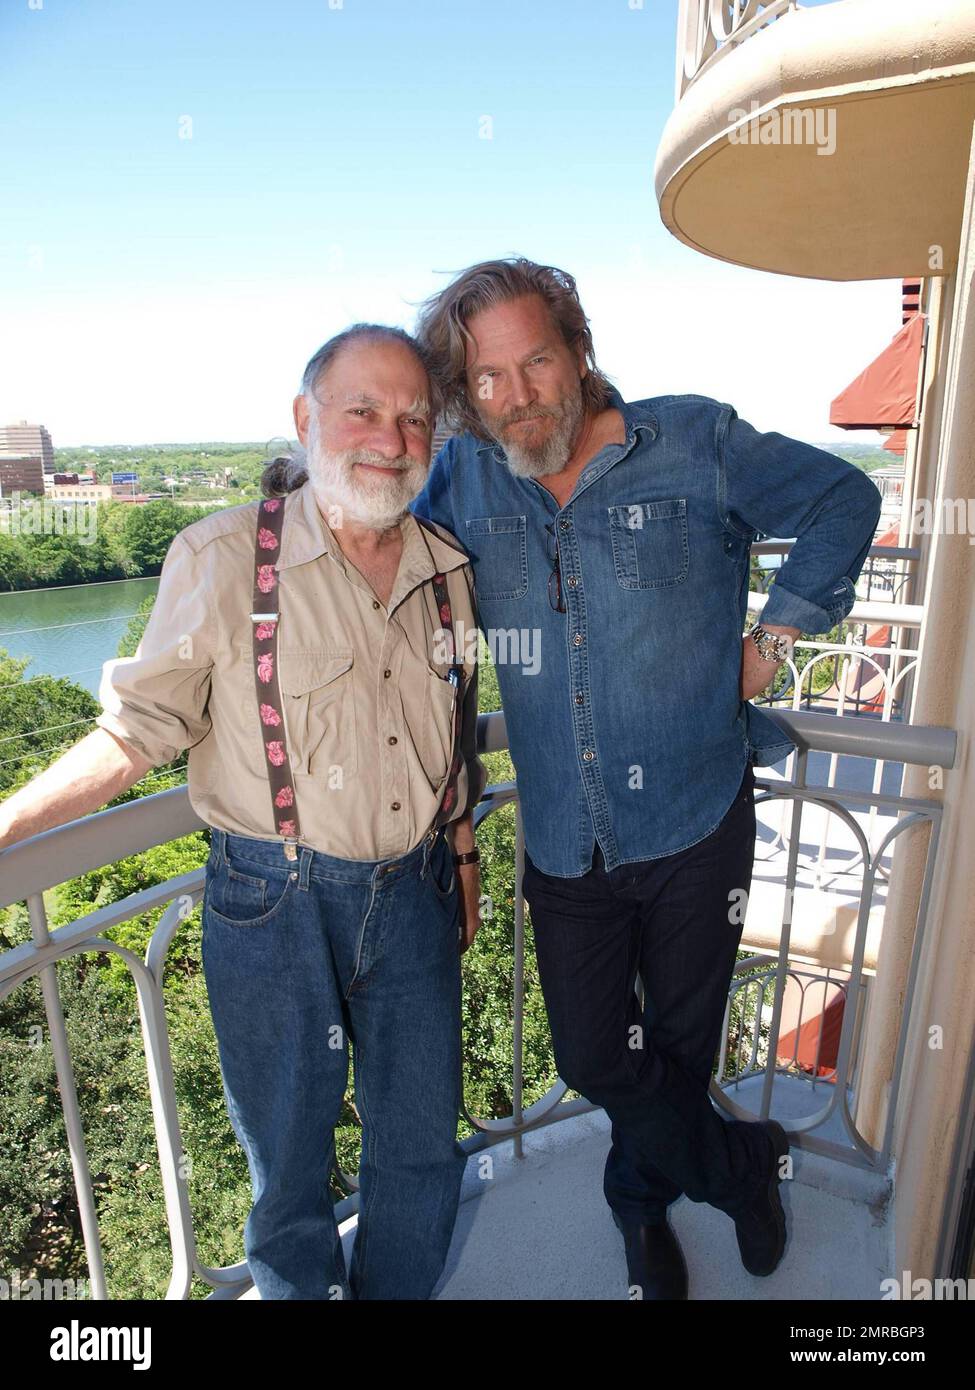 Oscar-winning actor Jeff Bridges poses for photos with Zen Master Bernie Glassman while in town filming the Coen Brothers' remake of the classic John Wayne western 'True Grit.' Bridges also stars in 'Tron Legacy' set for release in December. Austin, TX. 5/3/10.   . Stock Photo